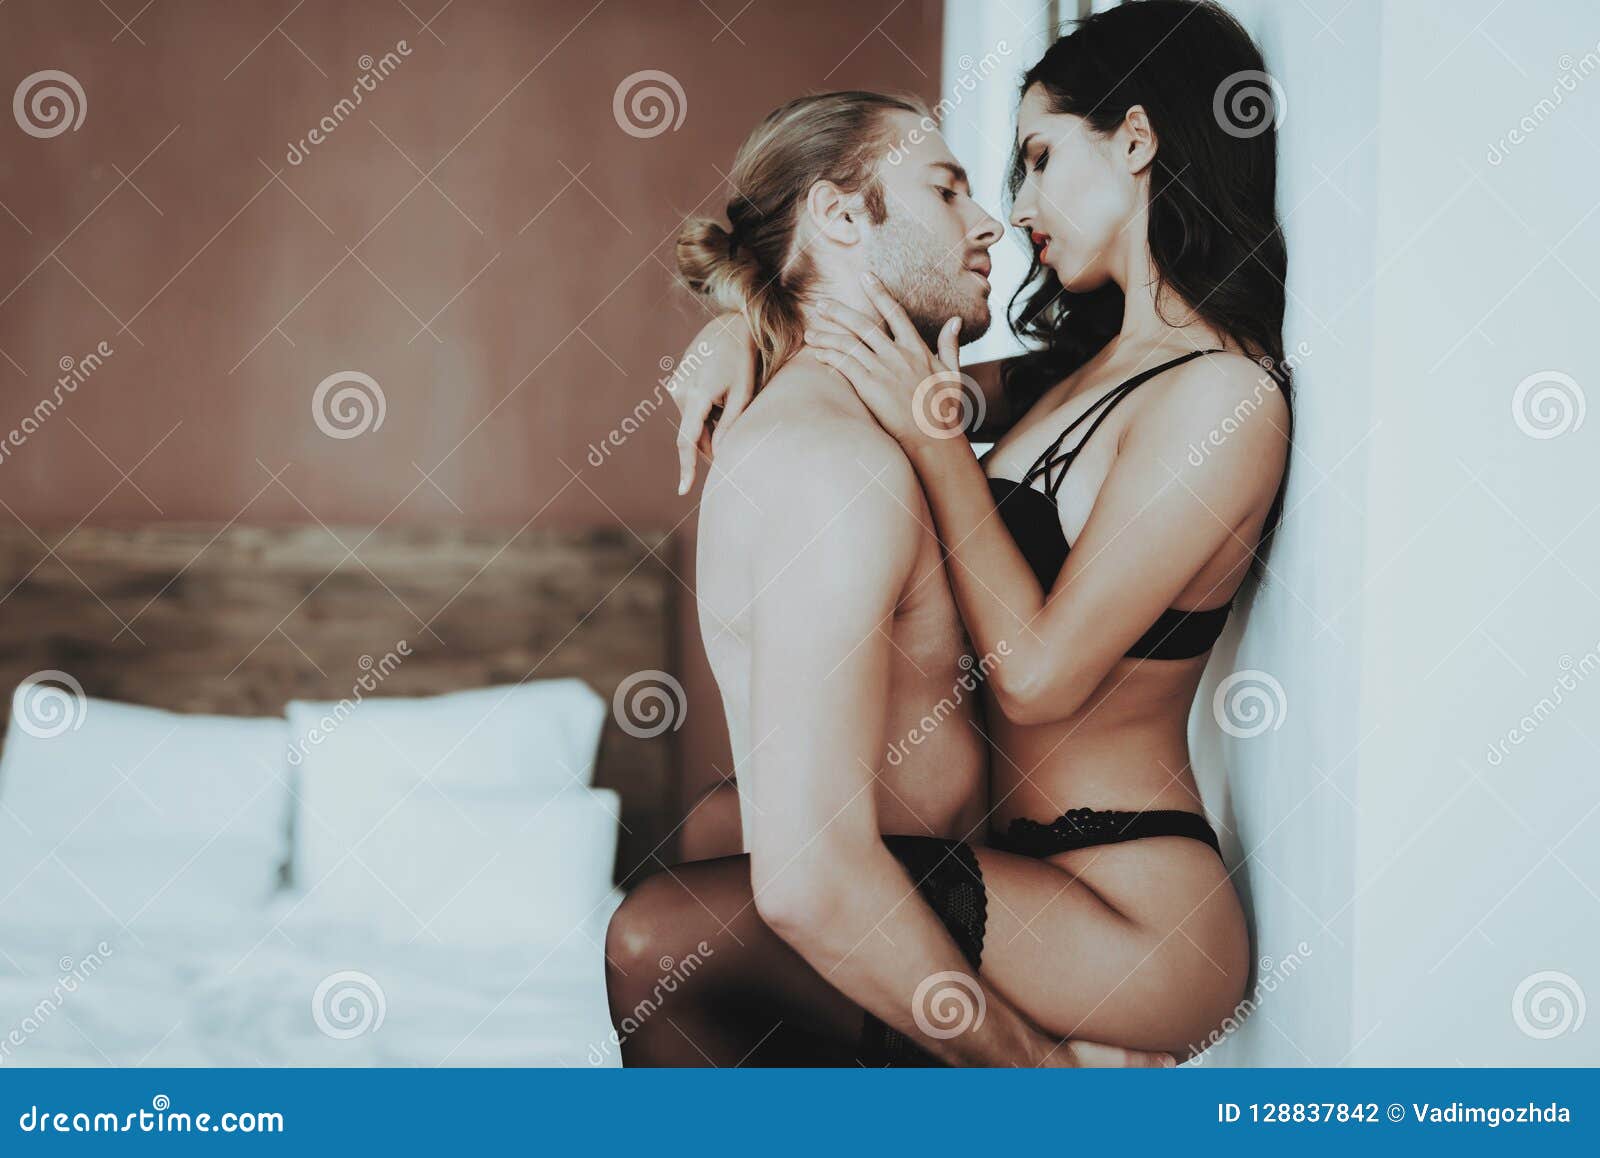 Passionate Man Holding Woman in Lingerie Near Wall Stock Photo pic photo picture